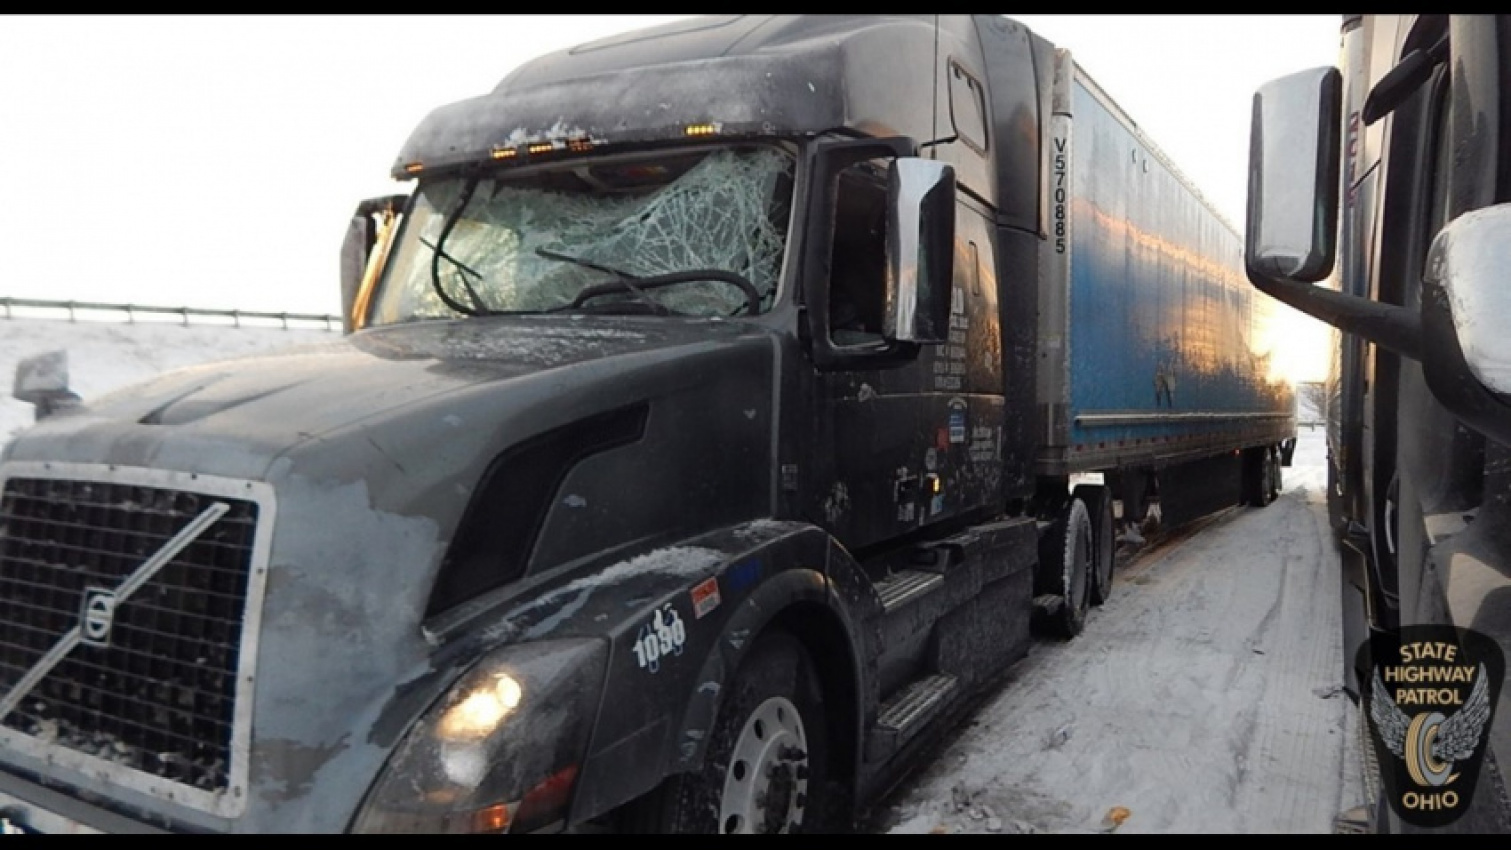 autos, cars, news, accidents, dashcam, offbeat news, police, reports, video, snowplow mishap damages at least 50 vehicles and causes multiple accidents in ohio